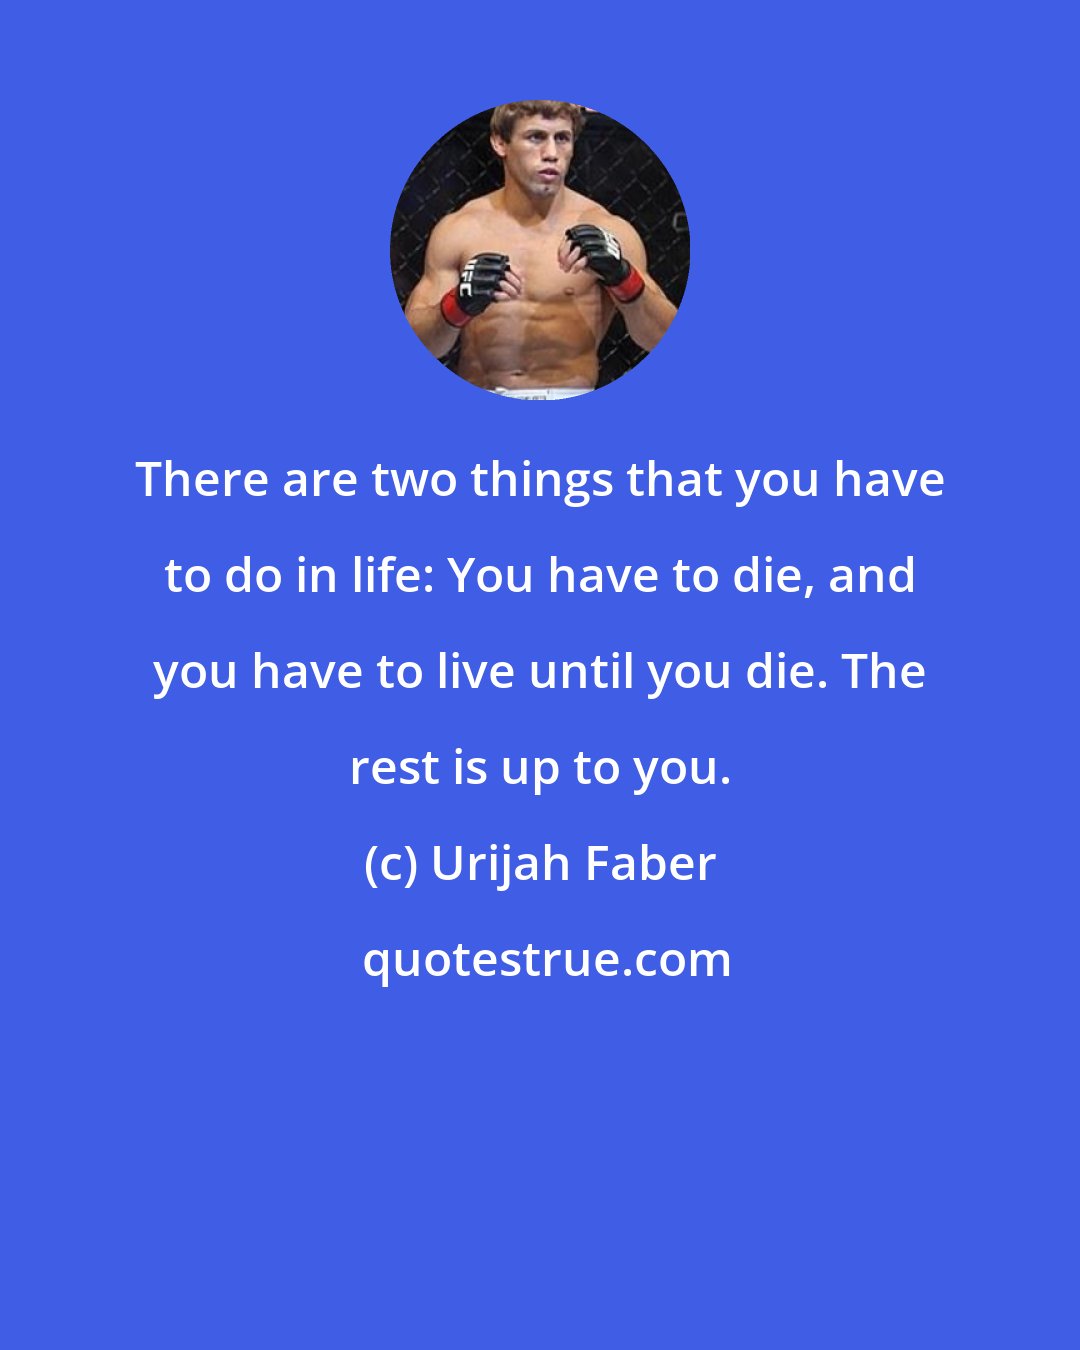 Urijah Faber: There are two things that you have to do in life: You have to die, and you have to live until you die. The rest is up to you.